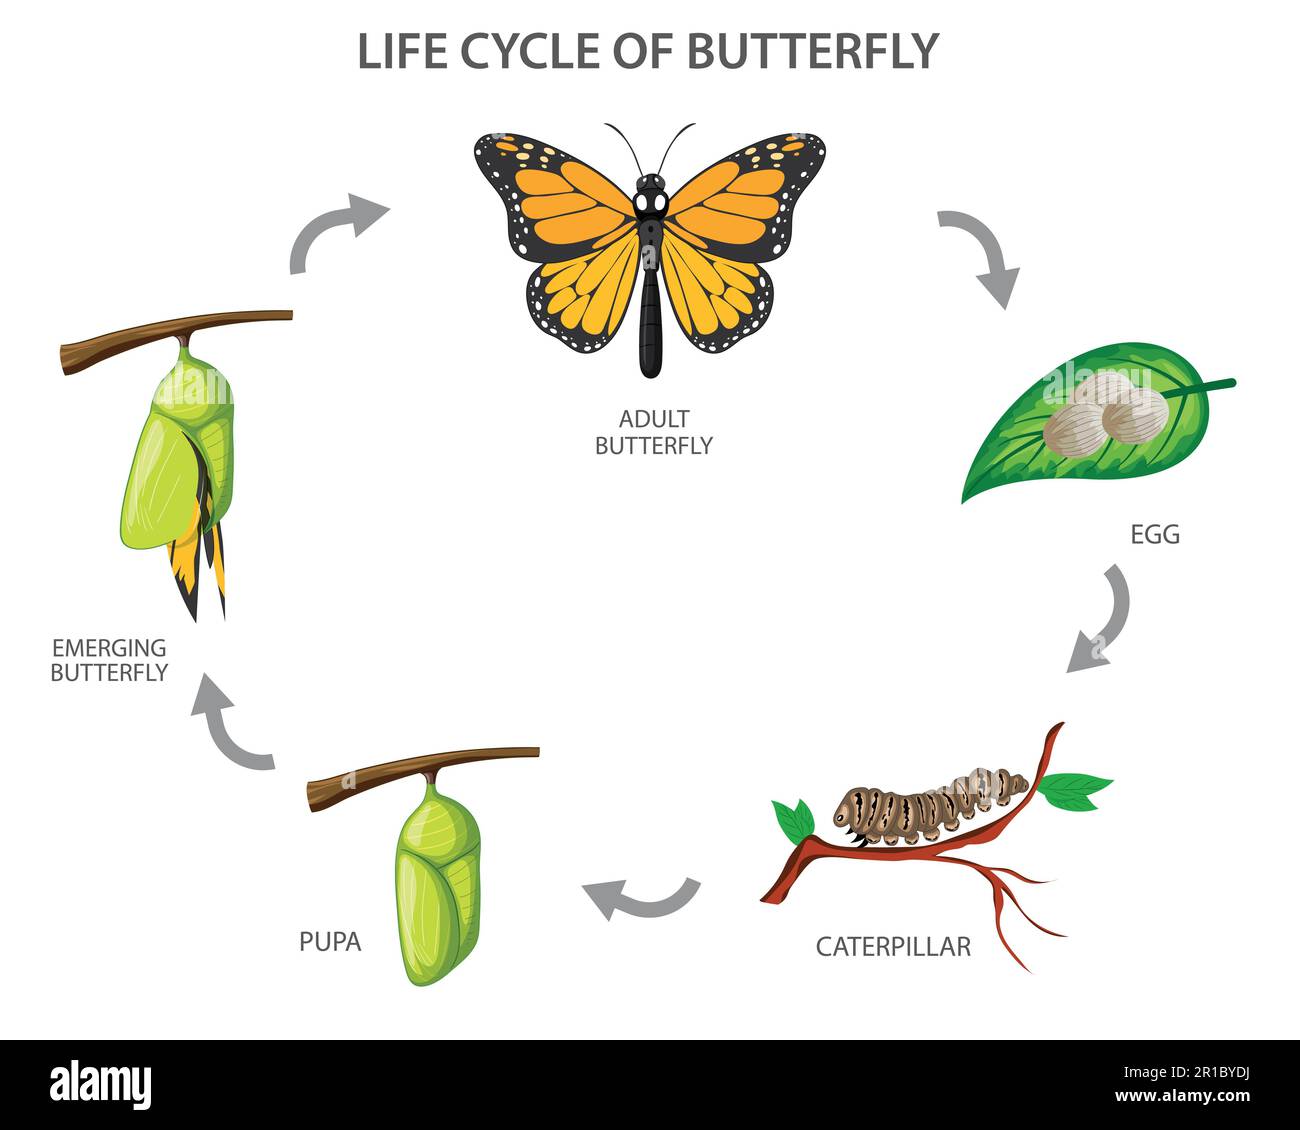 The metamorphosis of the butterfly,  egg, caterpillar, pupa, butterfly. Life cycle of butterfly Vector illustration Stock Vector